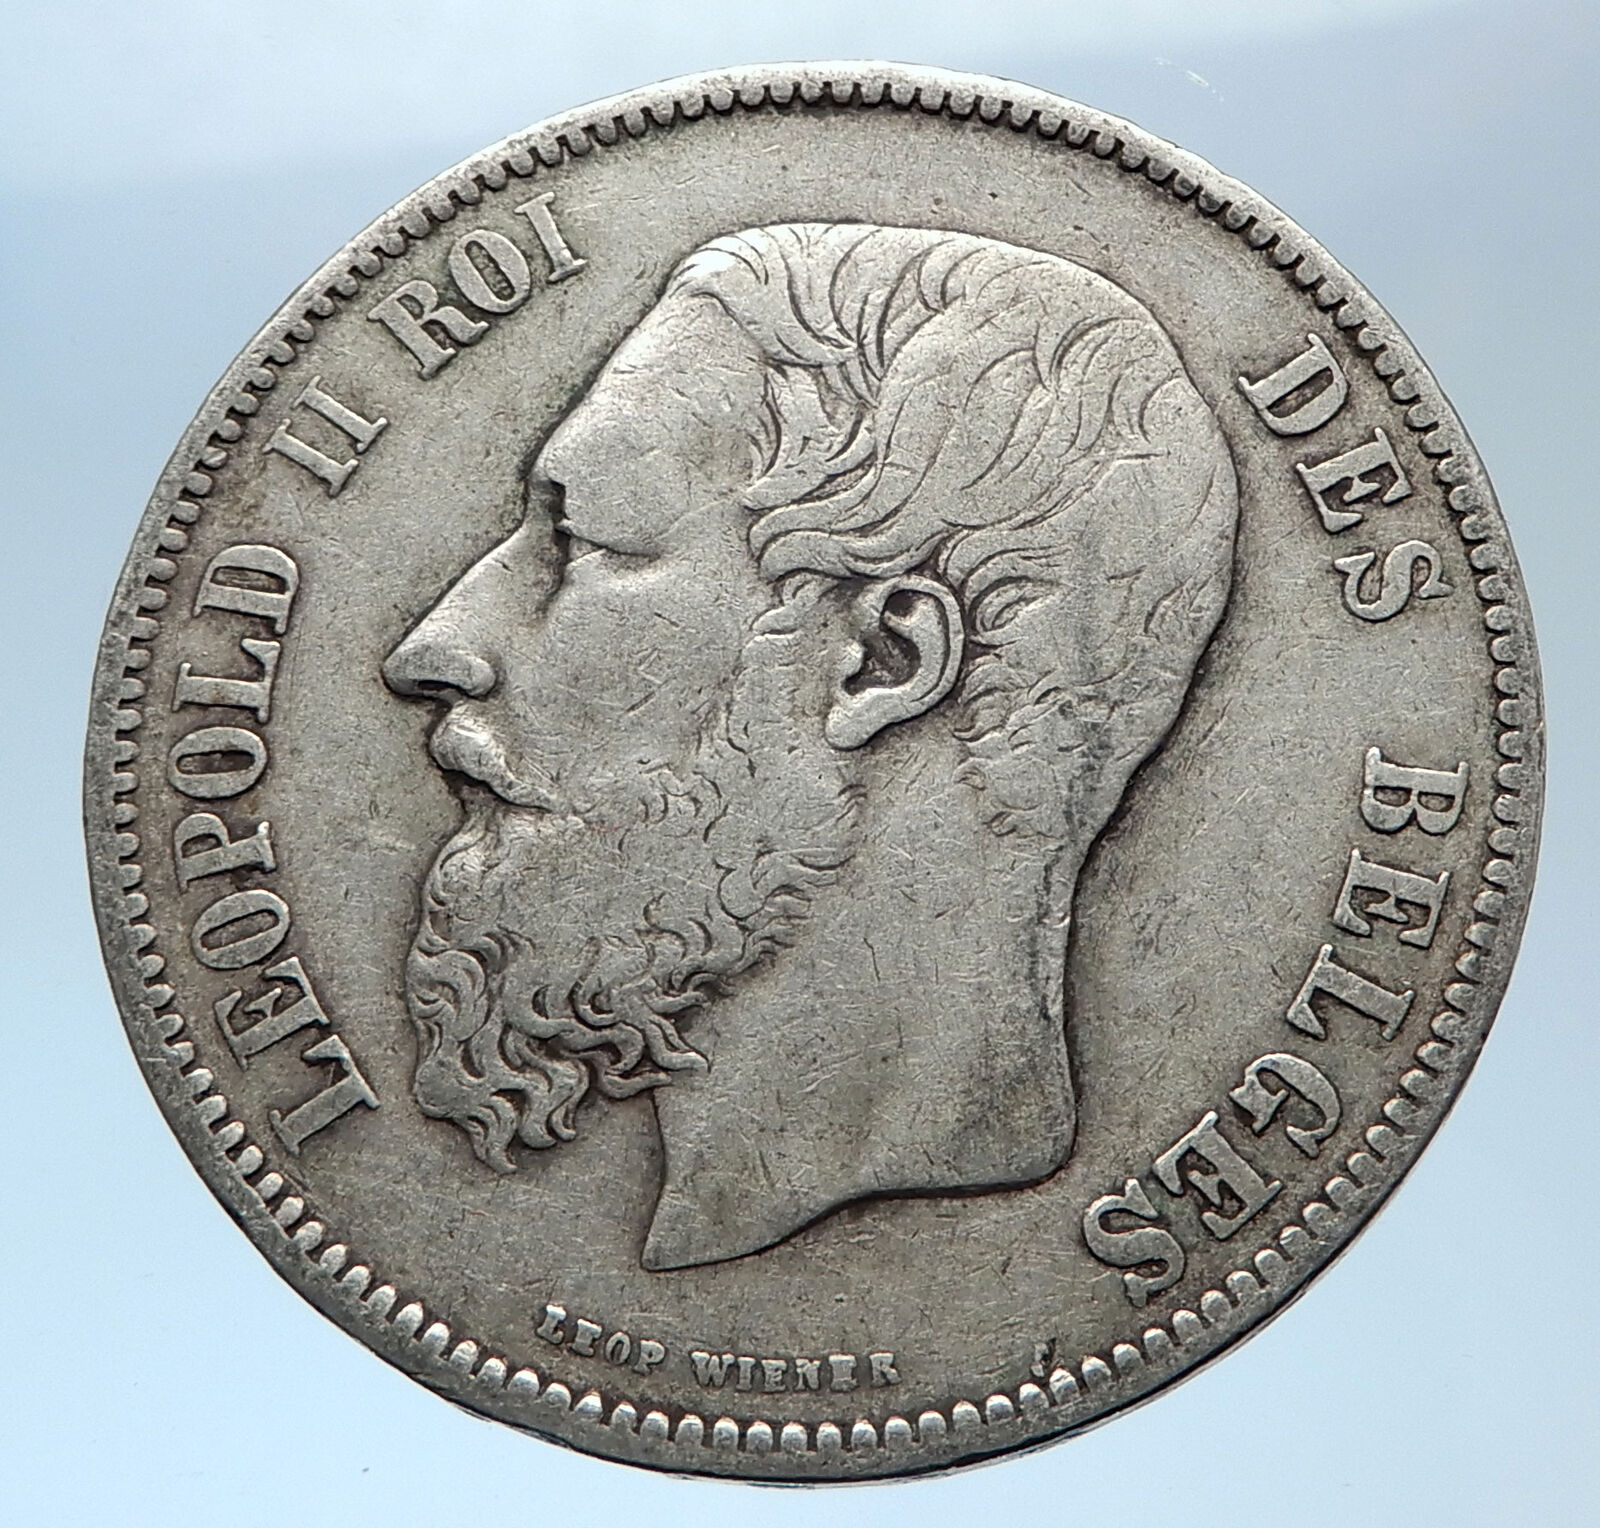 1873 BELGIUM with King LEOPOLD II and LION Antique Silver 5 Francs Coin i73980